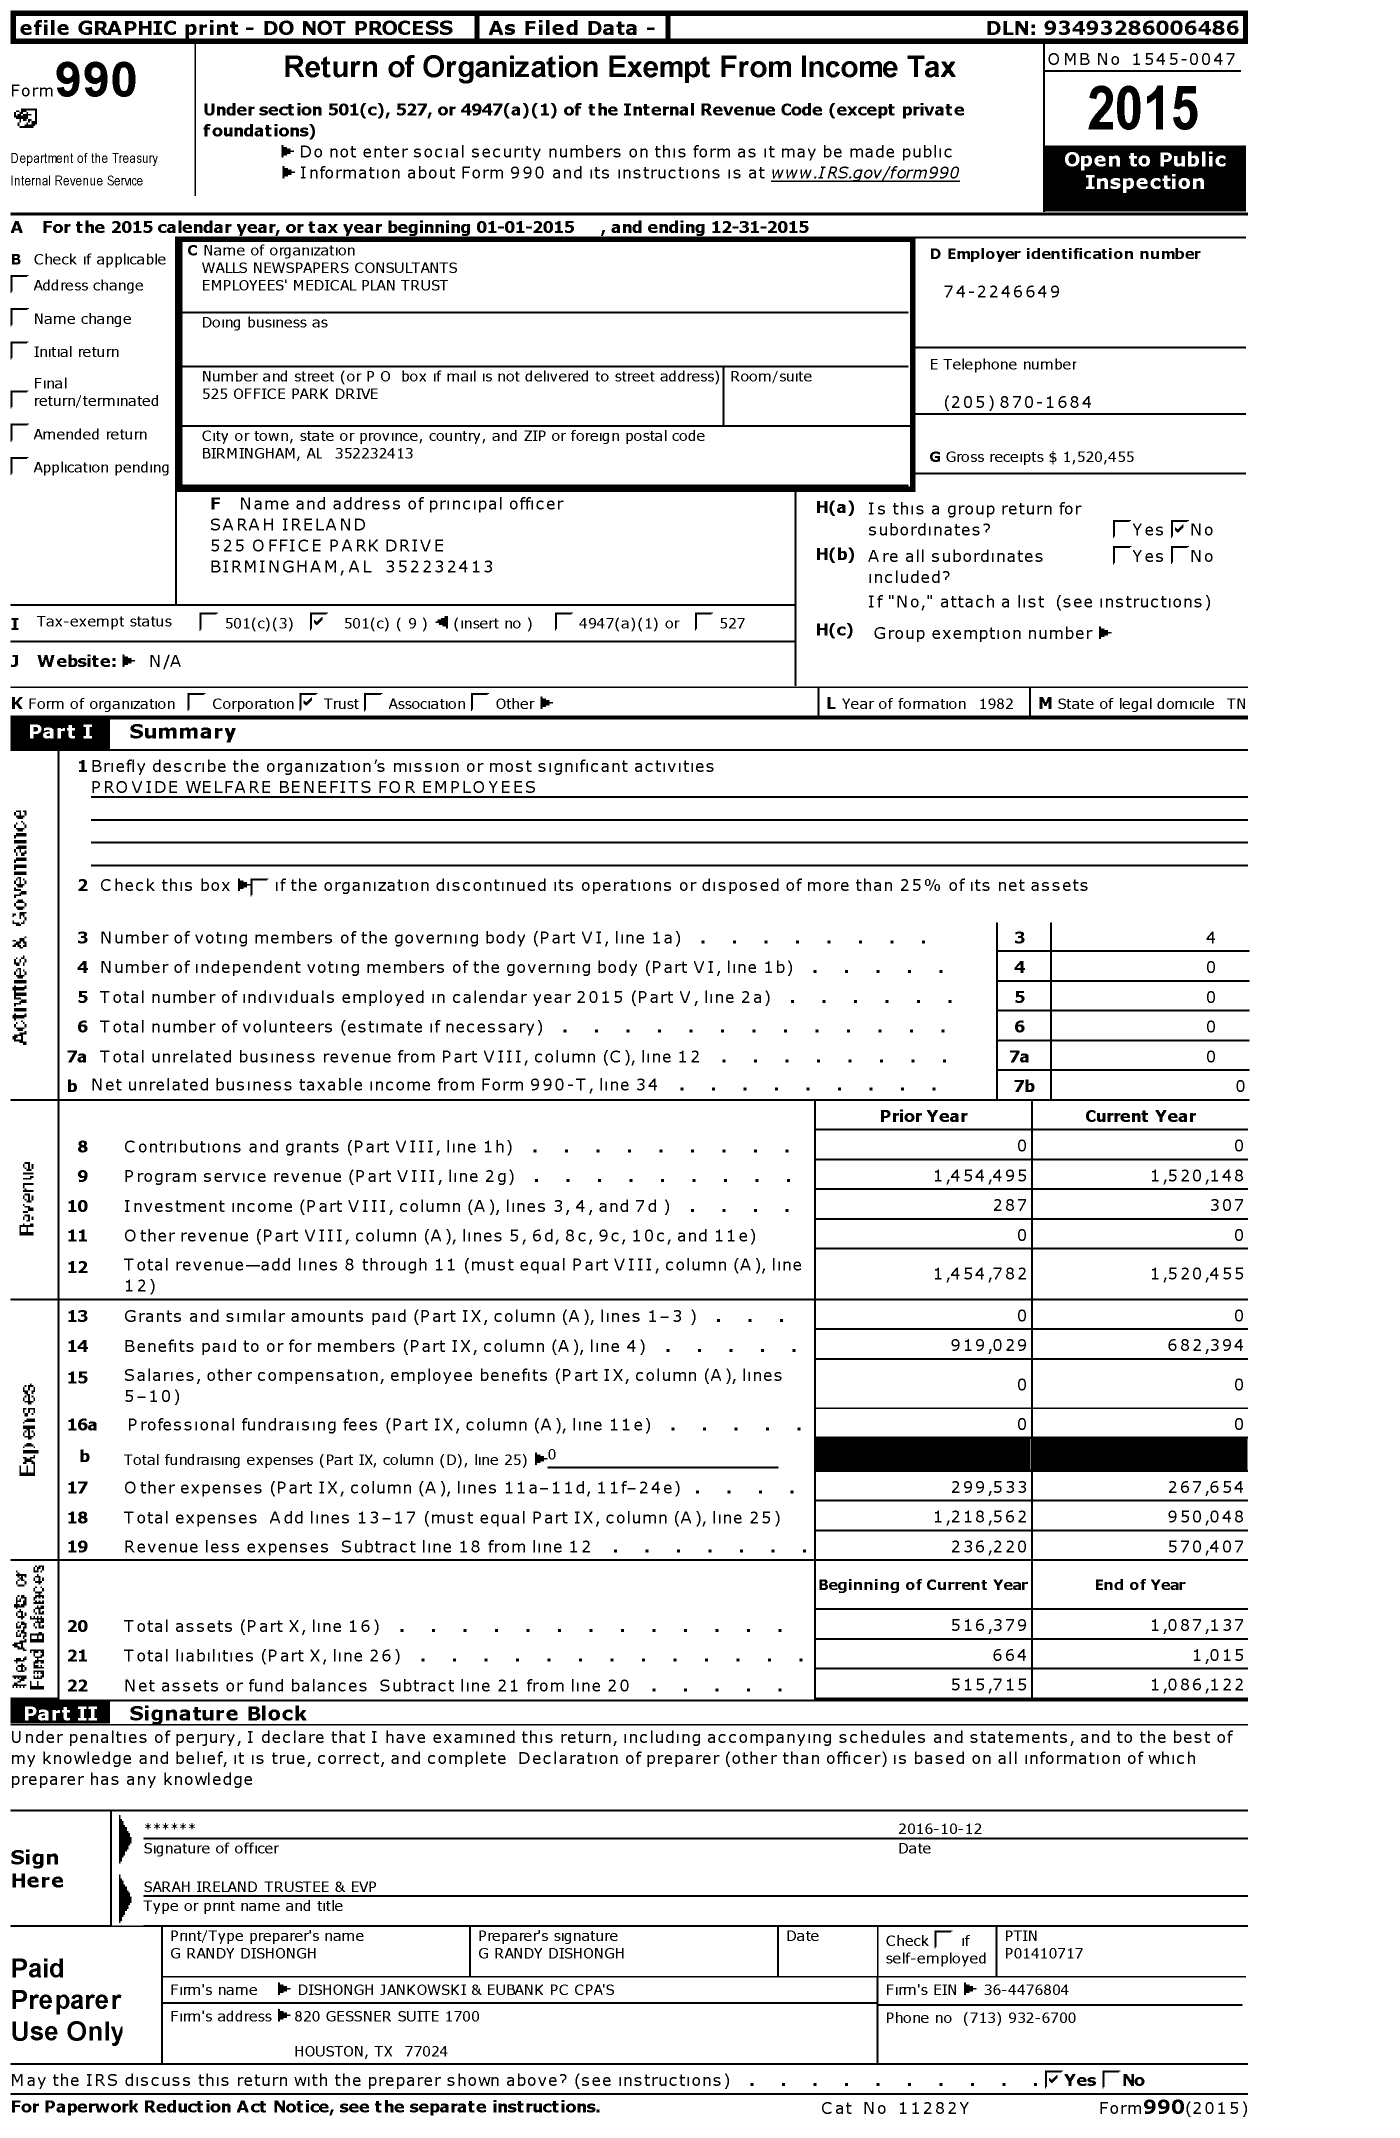 Image of first page of 2015 Form 990O for Walls Newspapers Consultants Employees' Medical Plan Trust